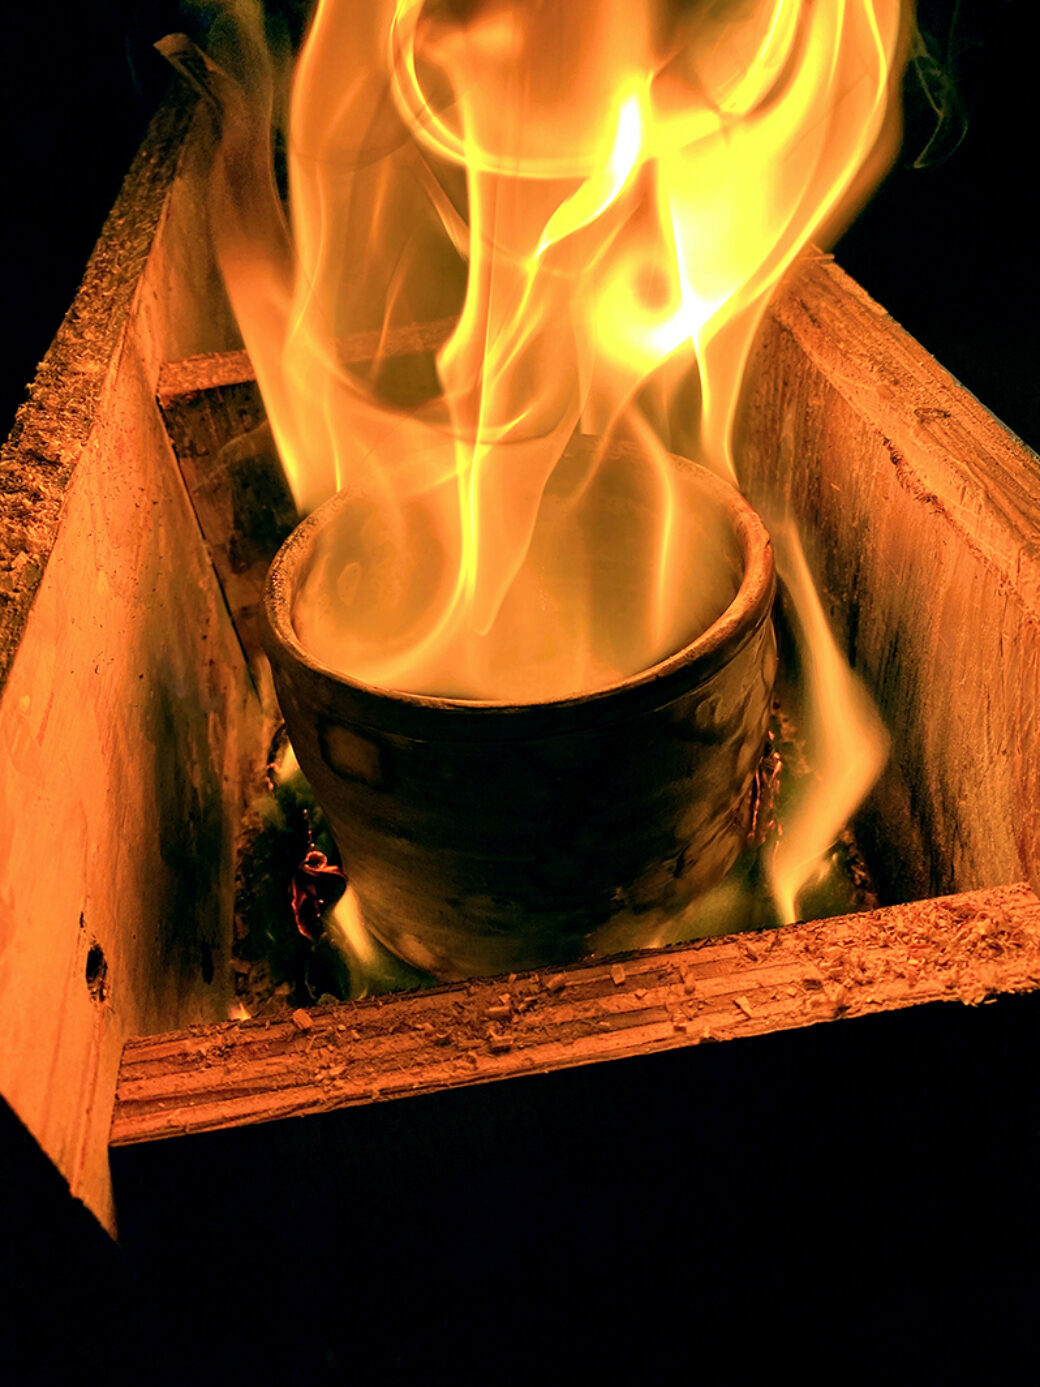 A ceramic cup on fire